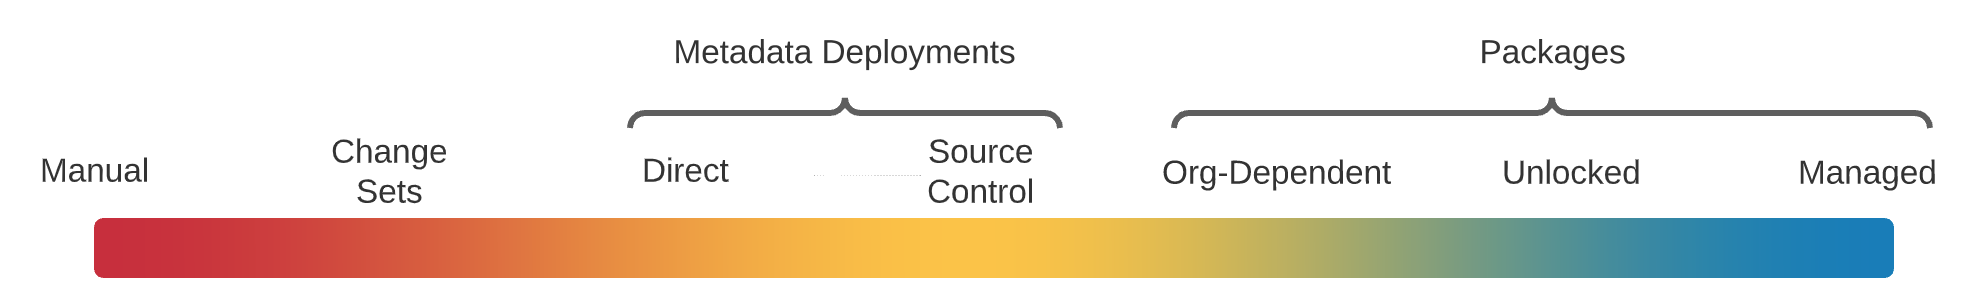 Spectrum with manual deployments as simplest choice and managed packages as most complex.